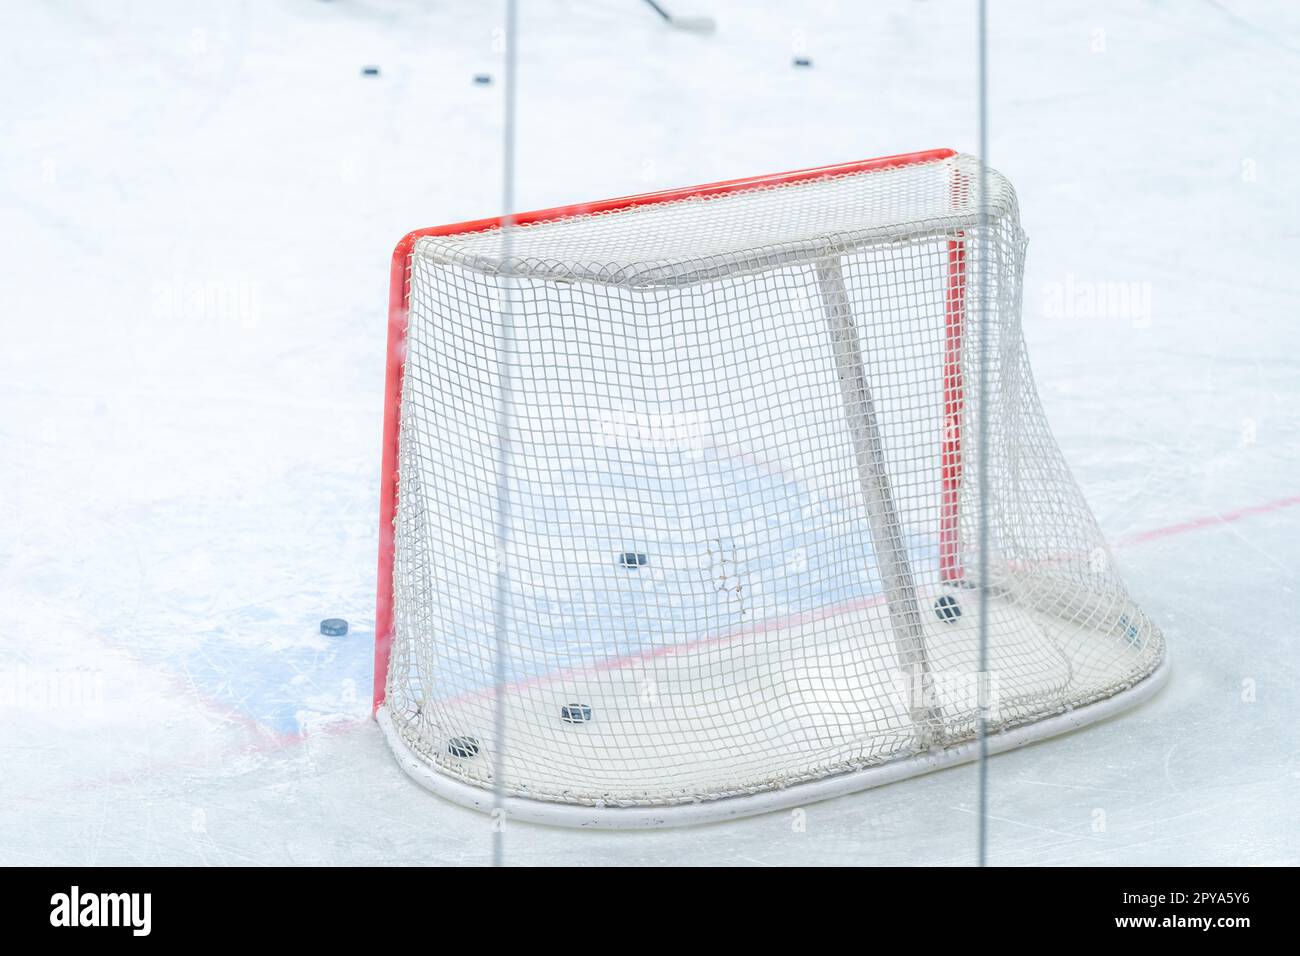 ice hockey goal with pucks, during a hockey players training session Stock Photo